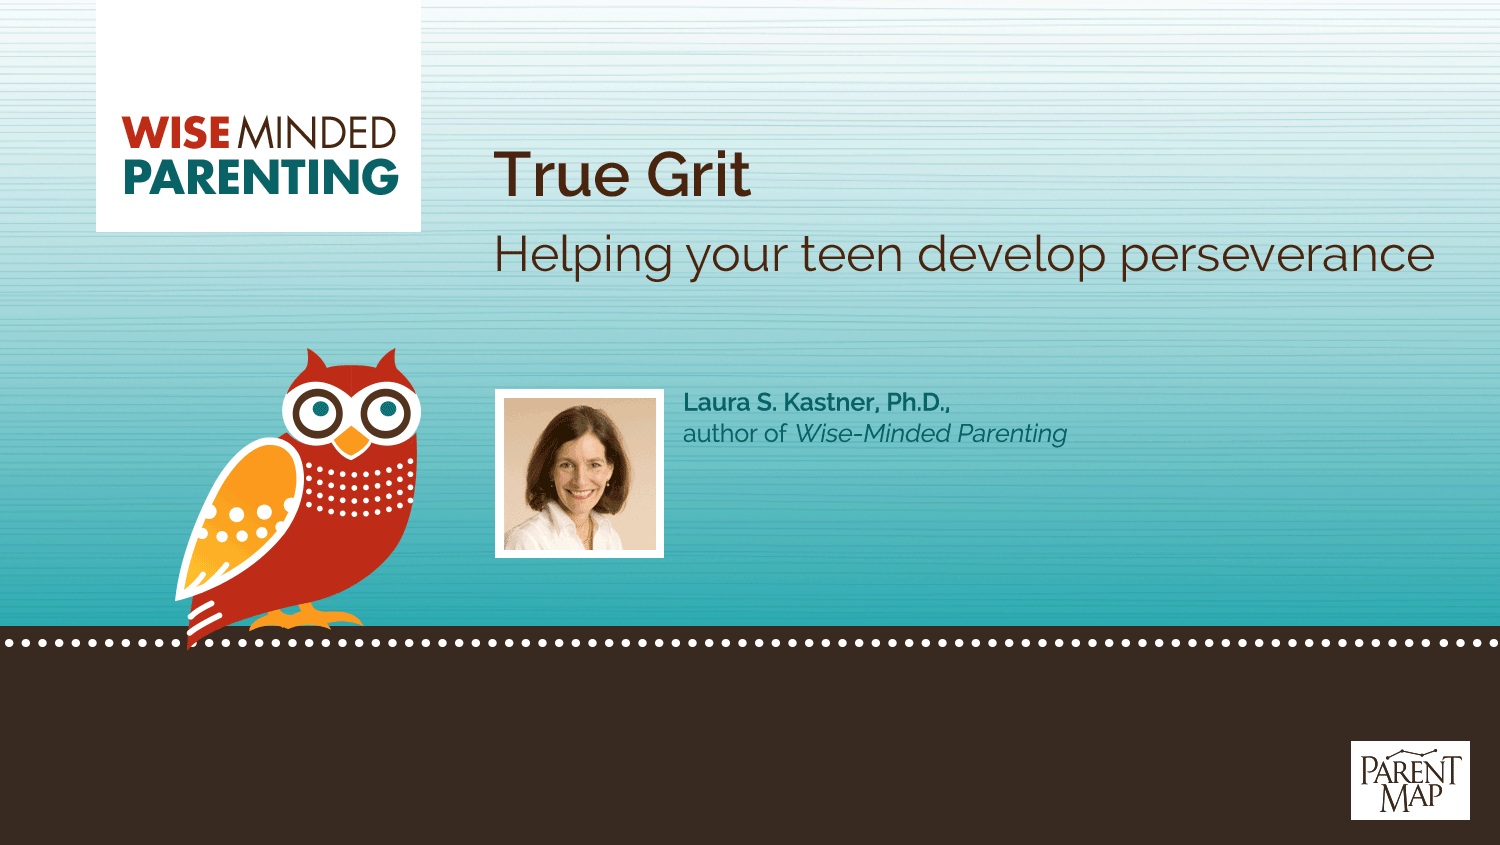 True Grit: Helping your teen develop perseverance